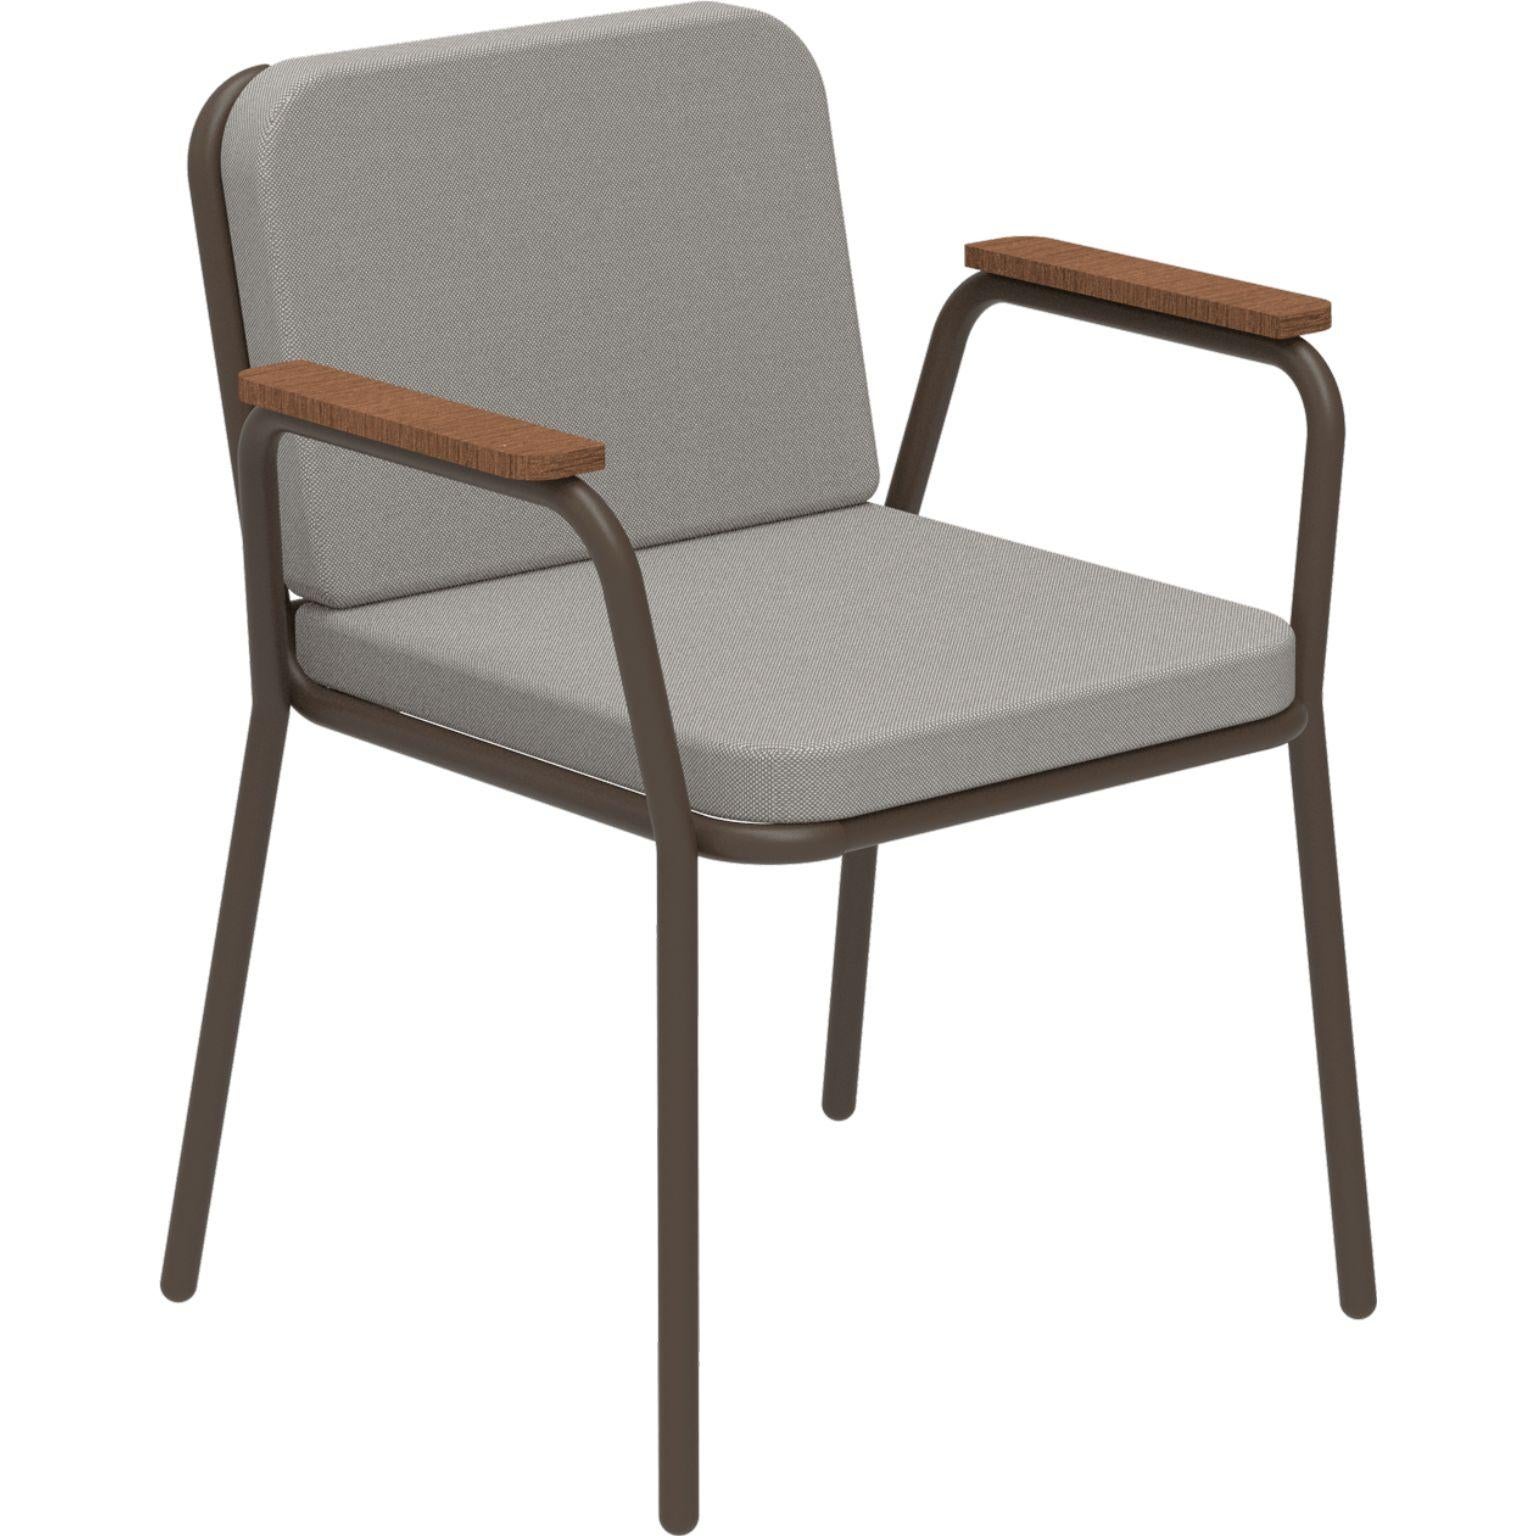 Nature Bronze Armchair by MOWEE
Dimensions: D60 x W67 x H83 cm (seat height 42 cm).
Material: Aluminum, upholstery and Iroko Wood.
Weight: 5 kg.
Also available in different colors and finishes. Please contact us.

An unmistakable collection for its